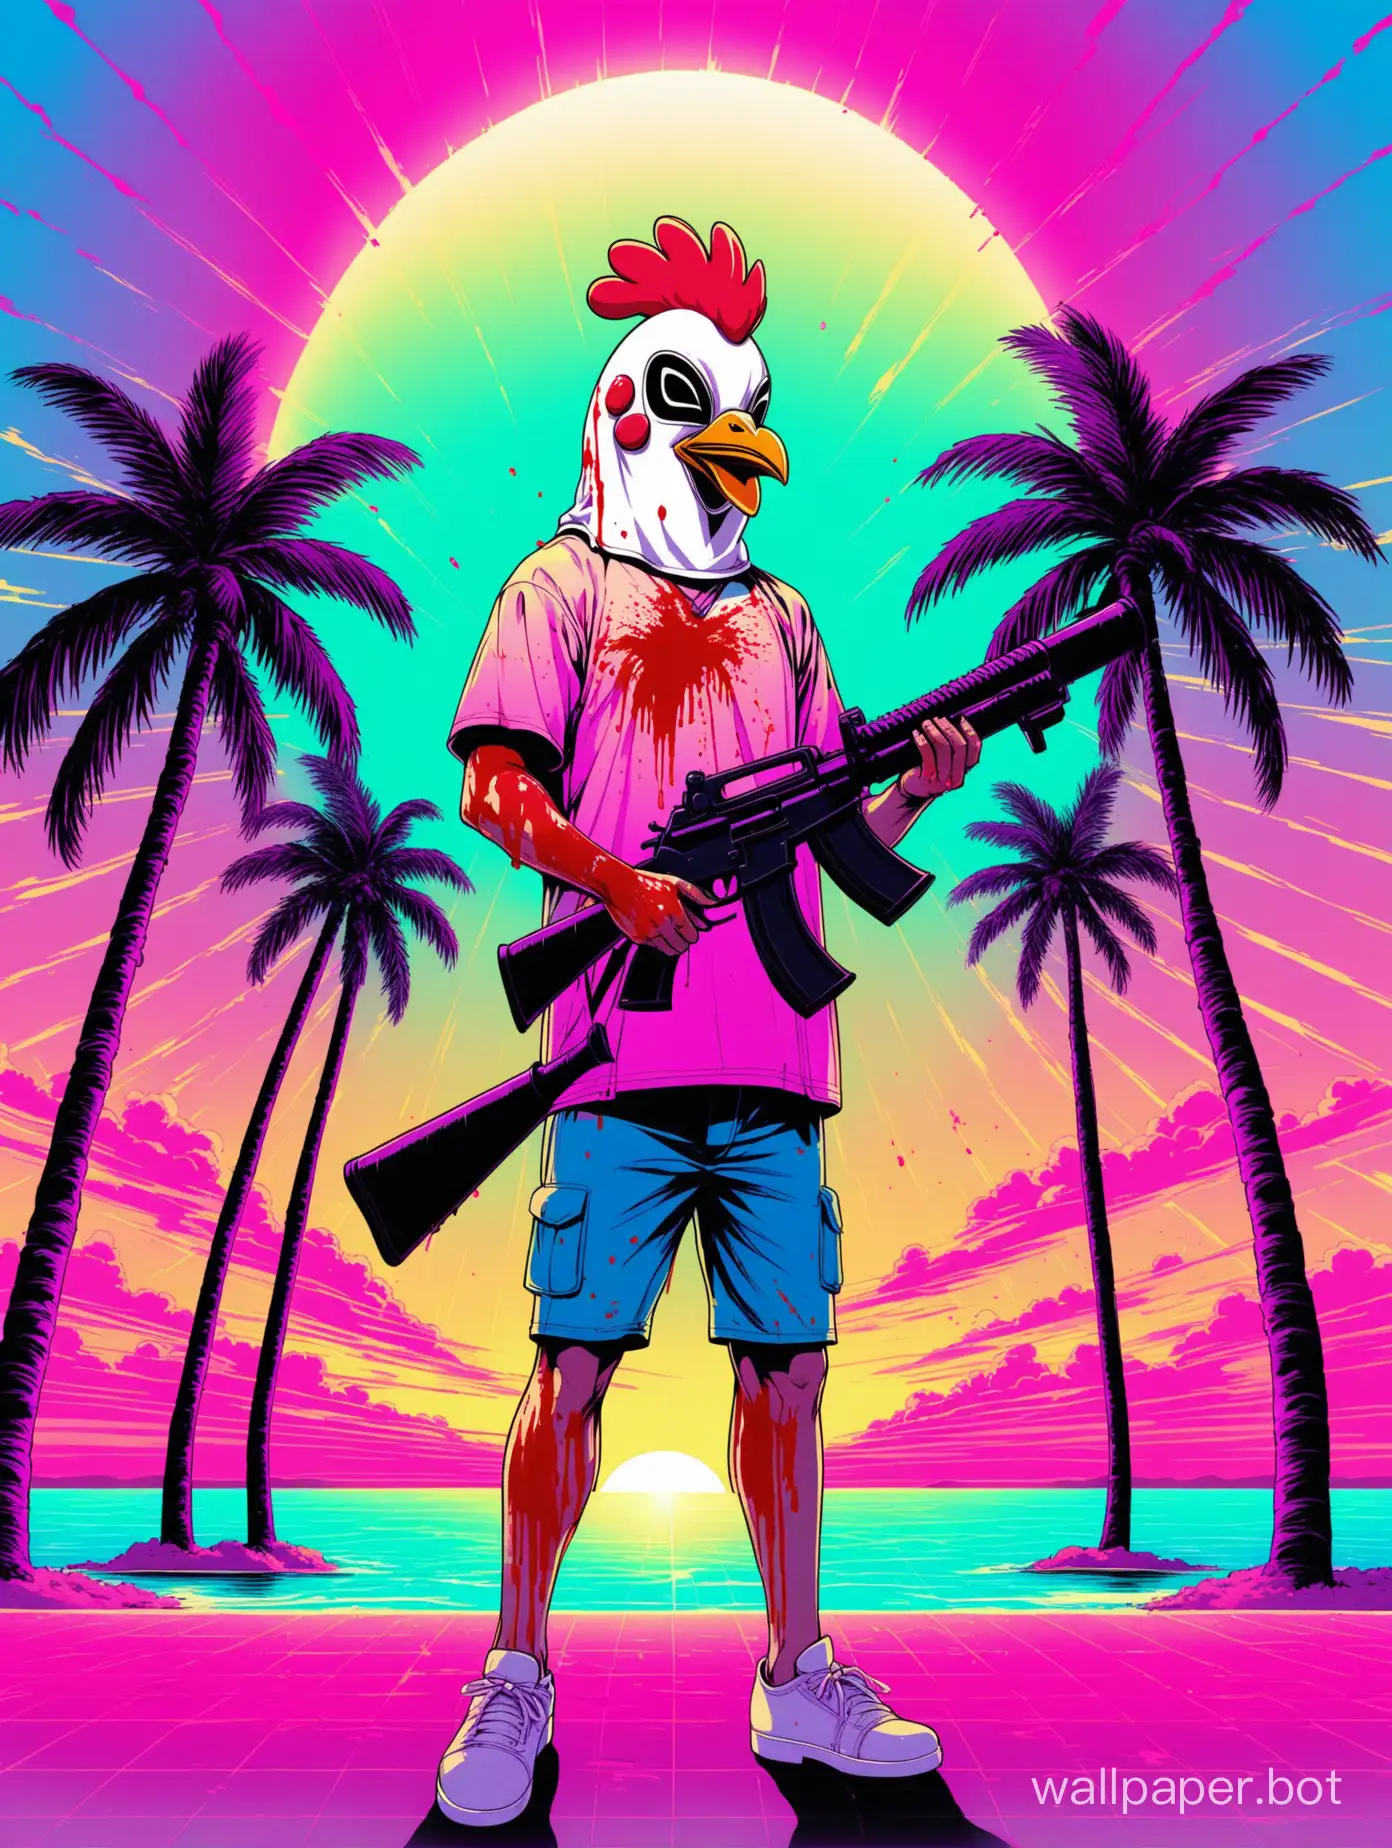 A guy wearing a chicken mask holding a gun and a baseball bat covered in blood standing in front of palm trees vaporwave style